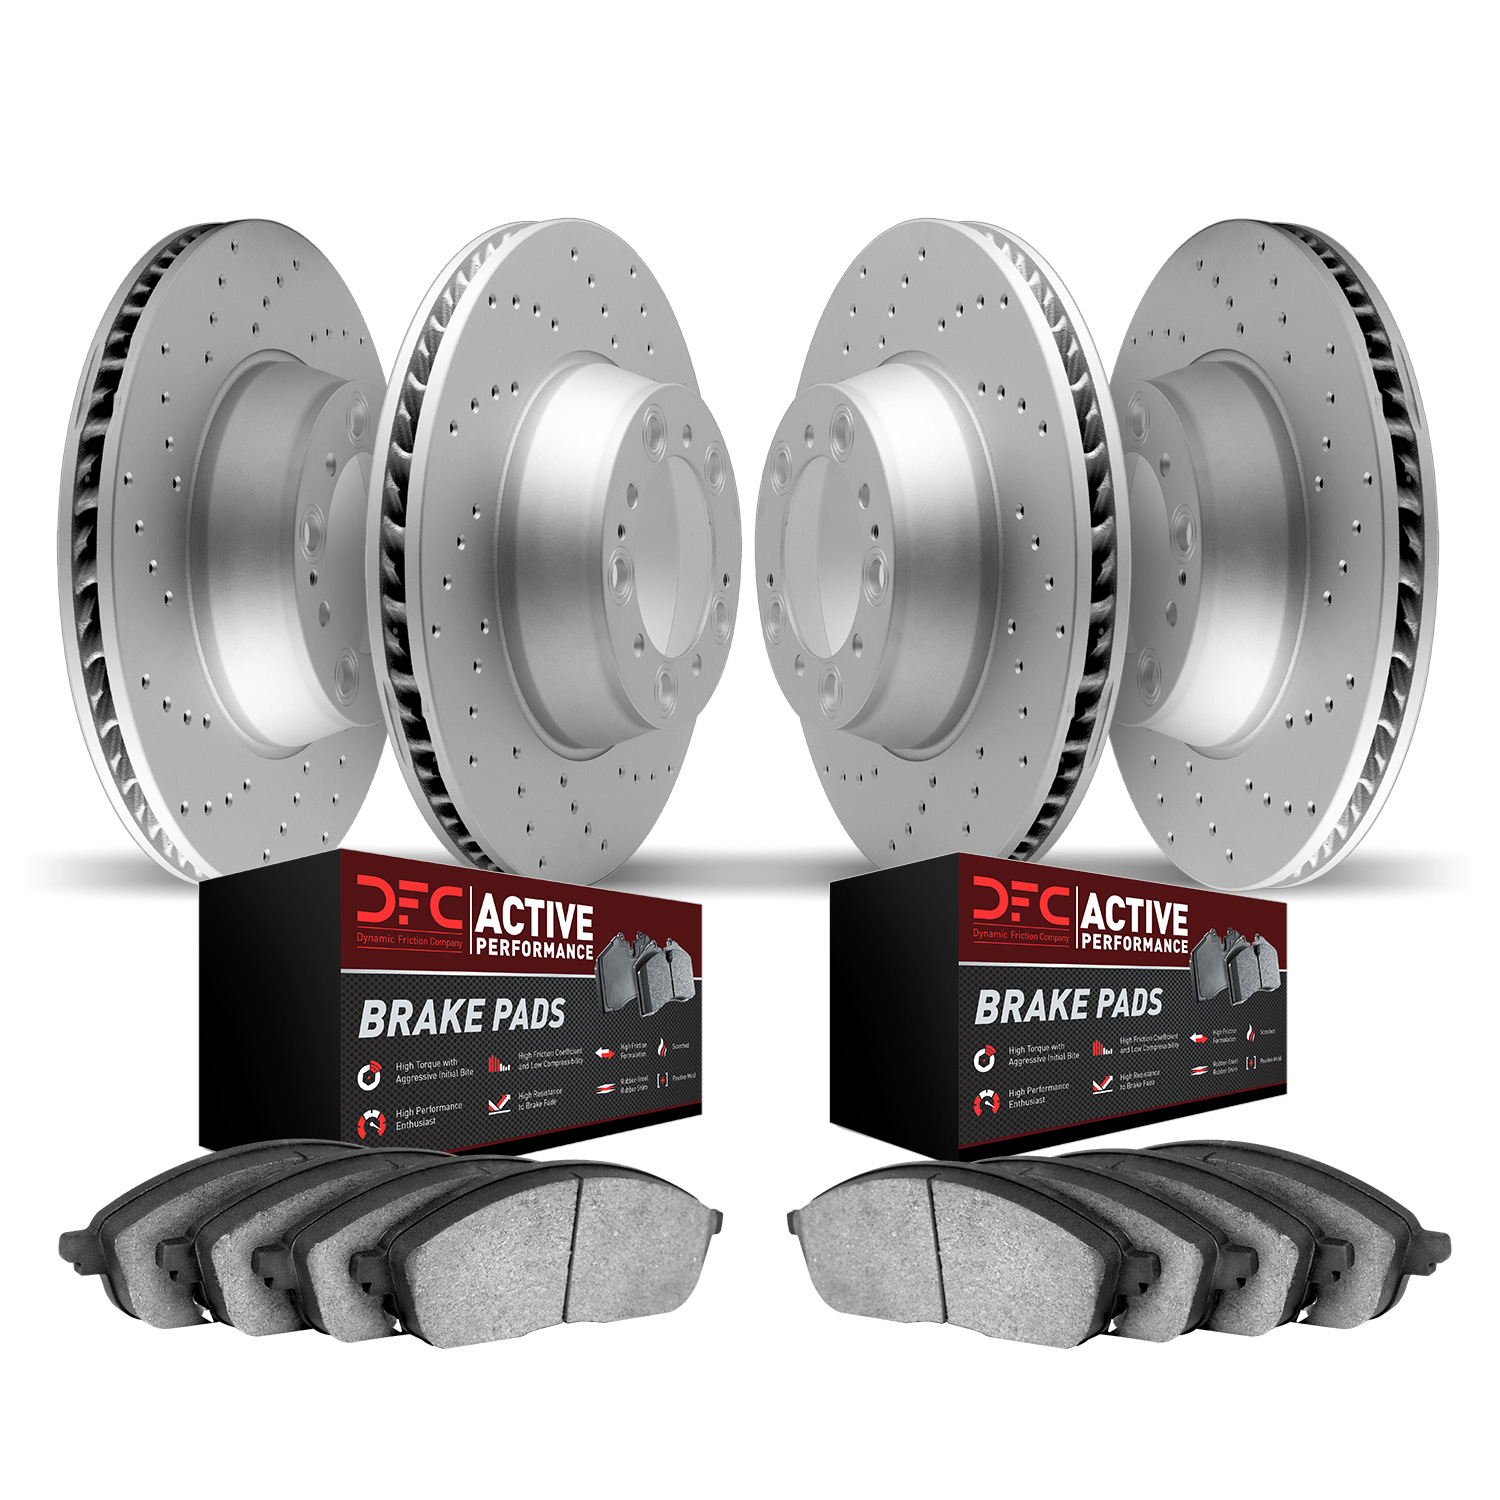 2704-54012 Geoperformance Drilled Brake Rotors with Active Performance Pads Kit, 2005-2010 Ford/Lincoln/Mercury/Mazda, Position: